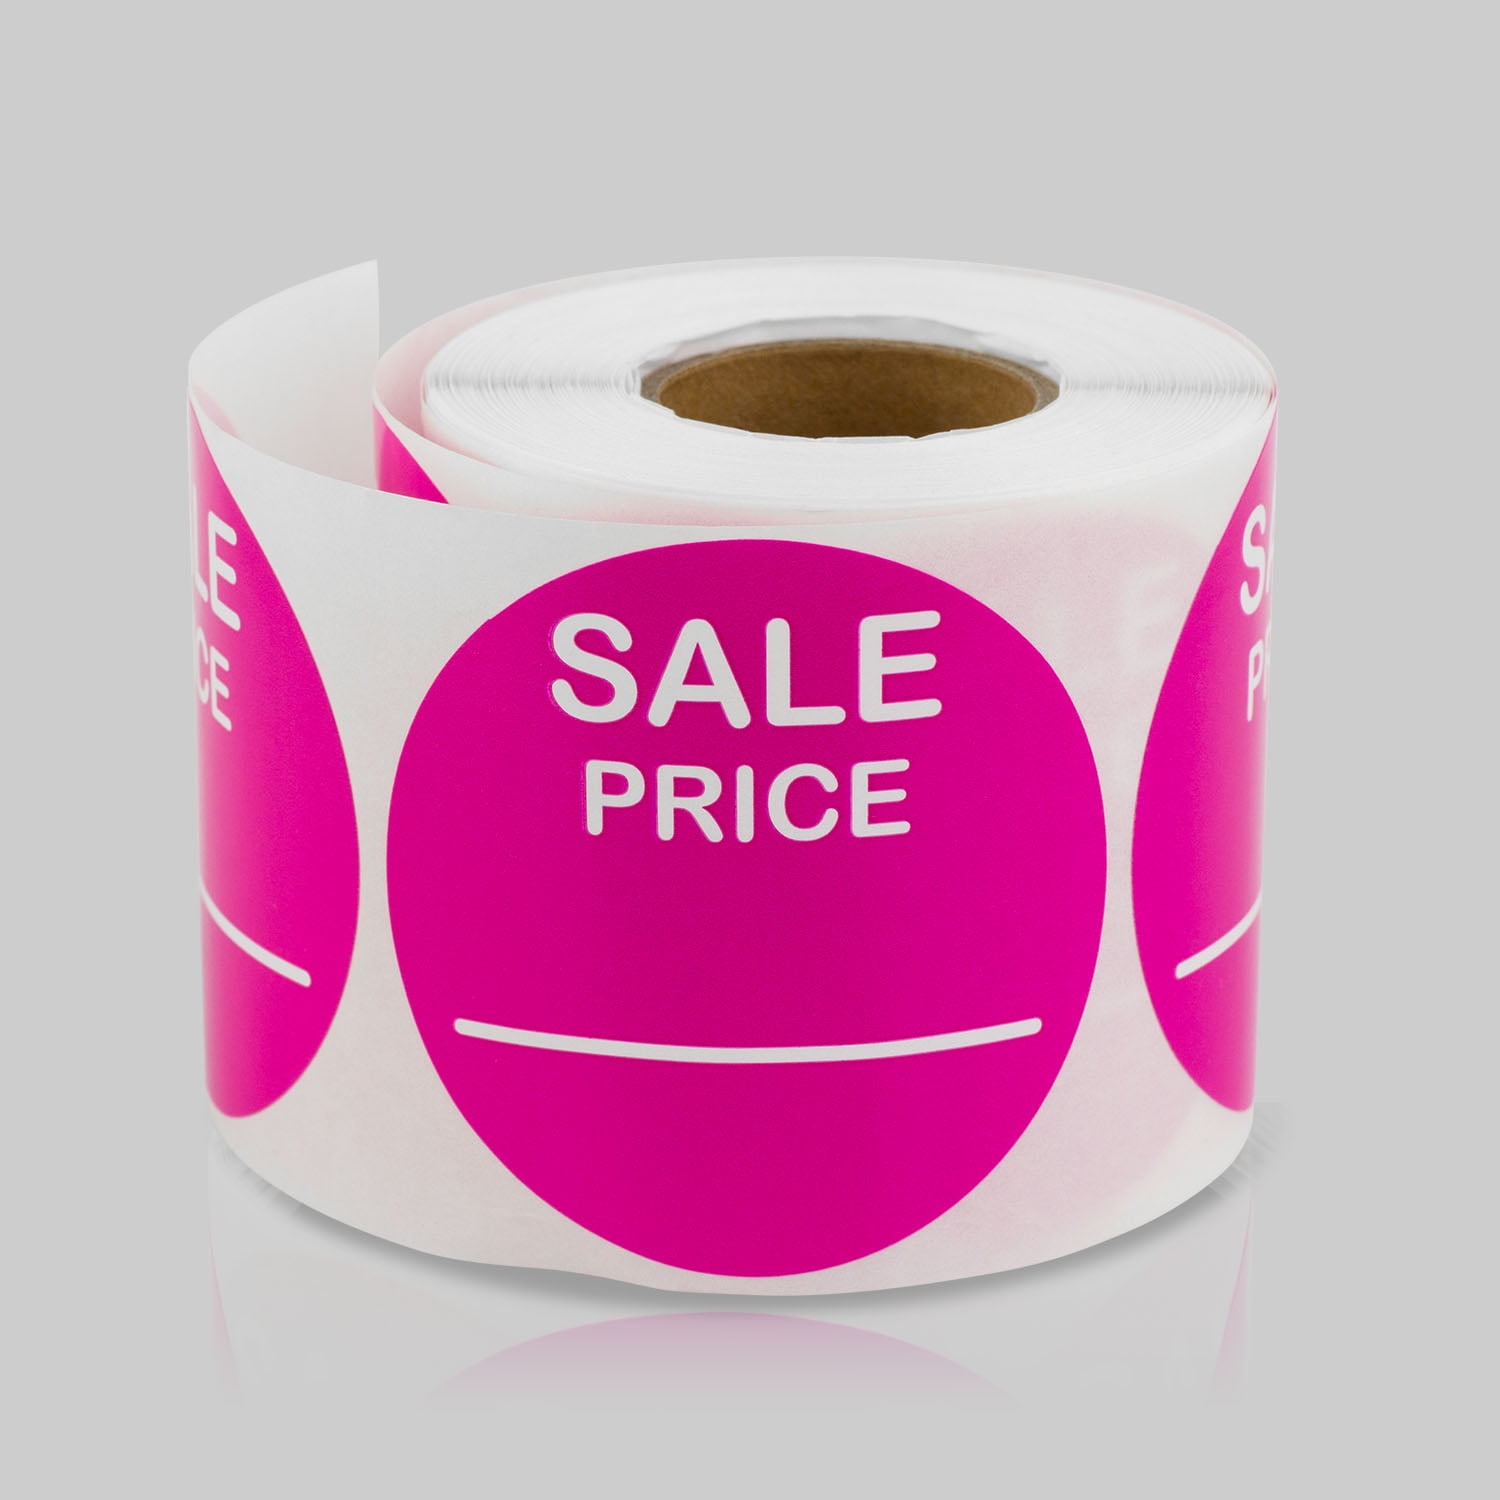 500//Dispenser Box ChromaLabel 3//4 inch Round Sale Labels Fluorescent Yellow Imprinted: 10/% Off